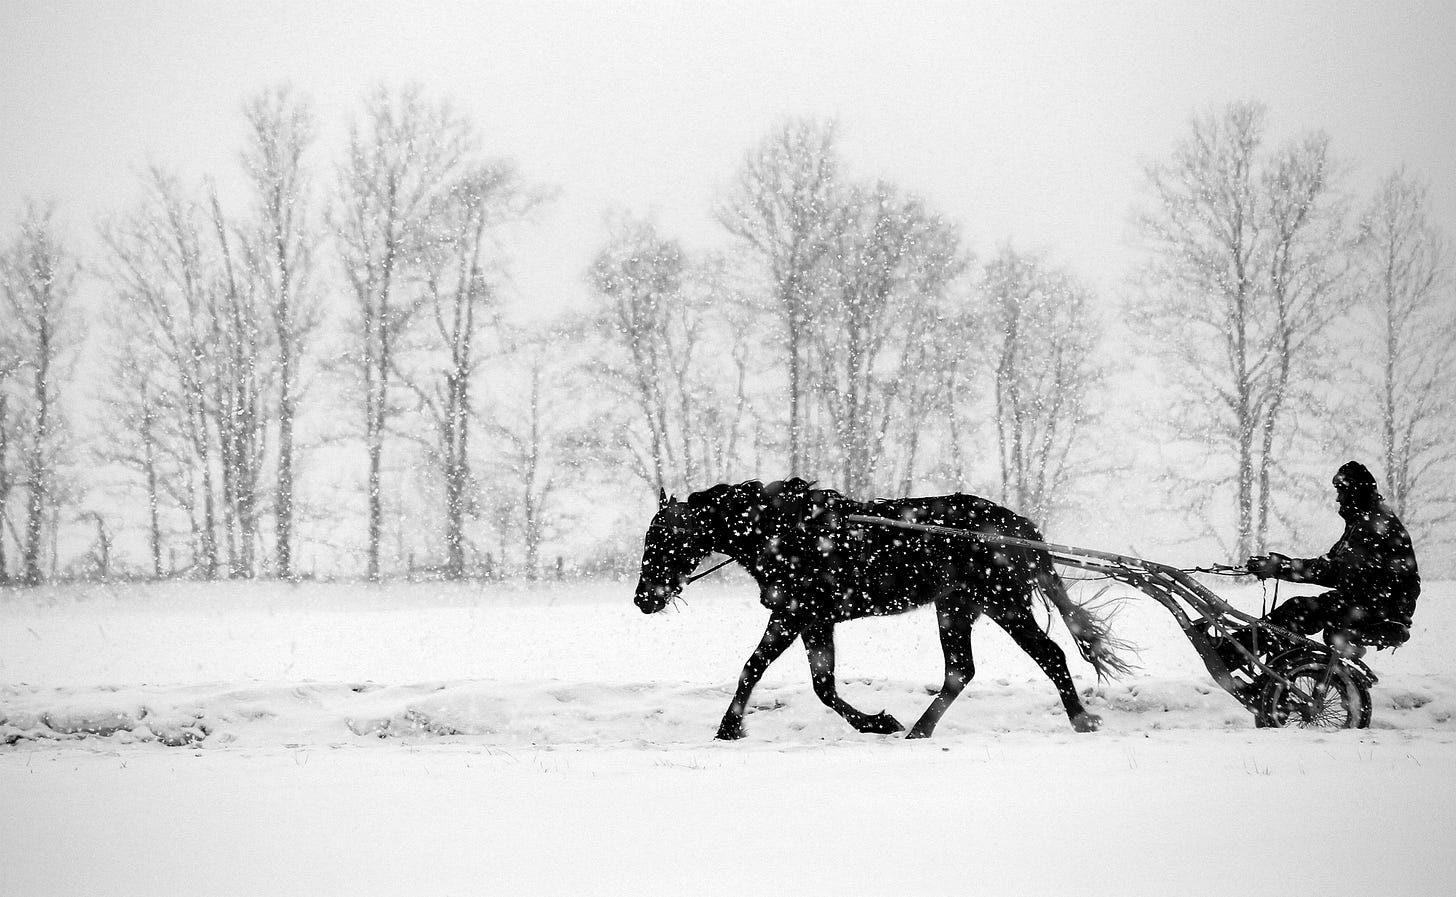 Wilfong horses plod through the weather.